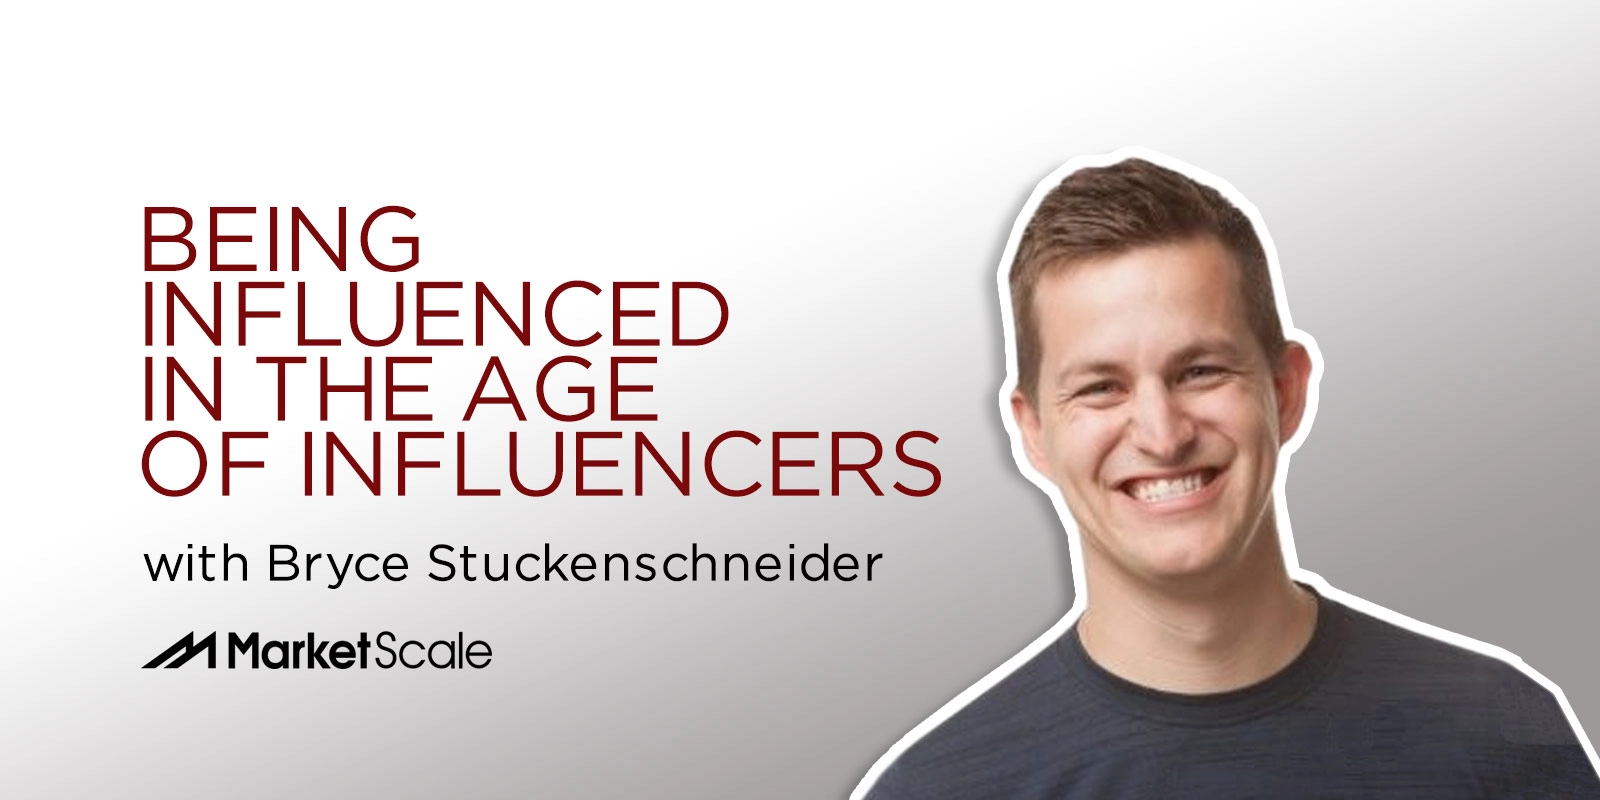 Being Influenced in the Age of Influencers With Bryce Stuckenschneider